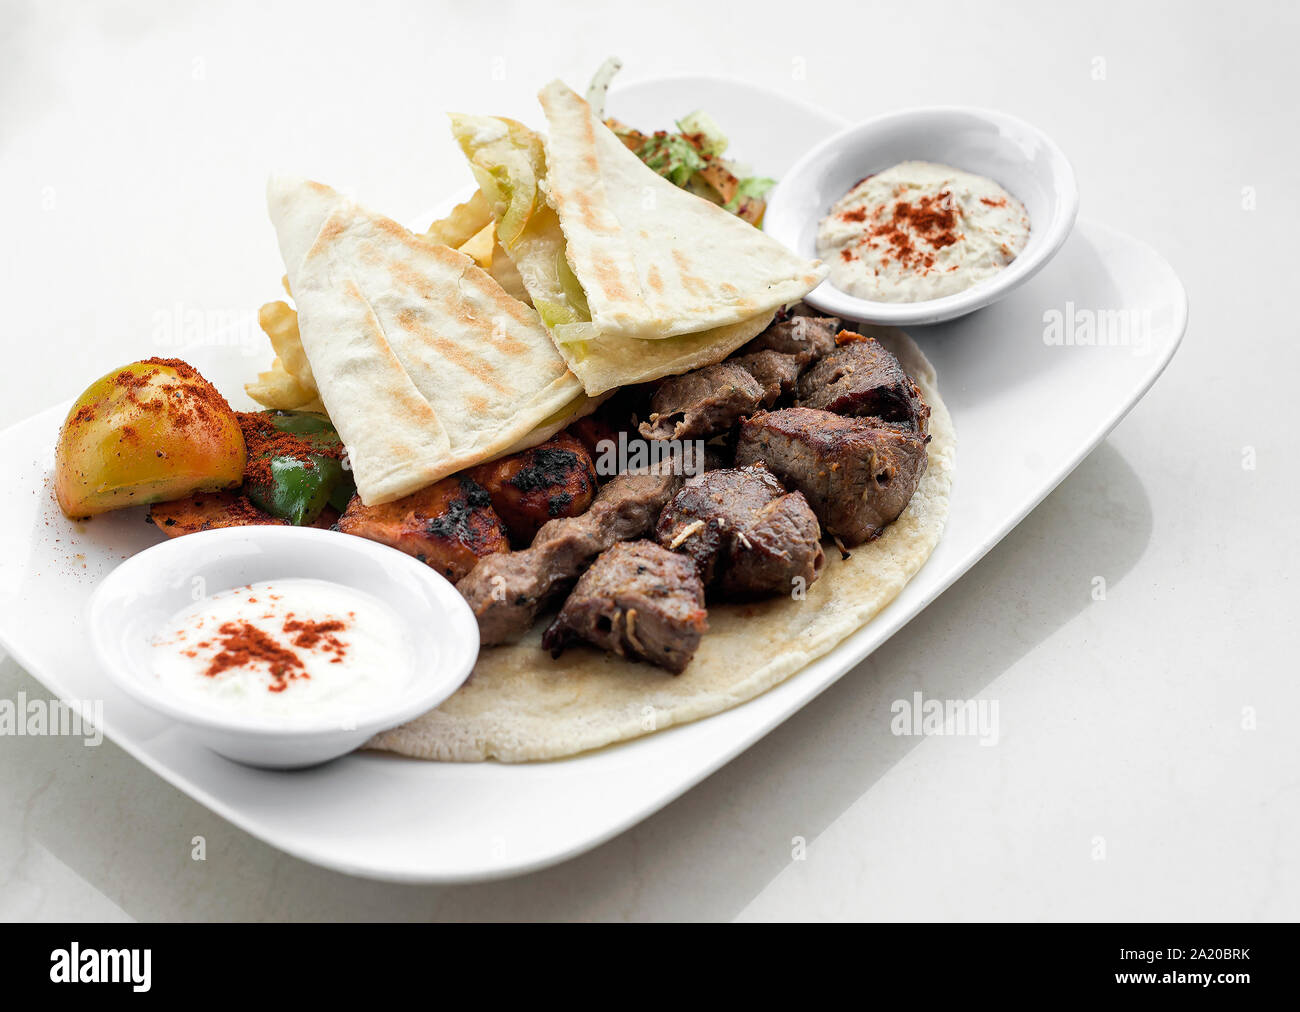 lebanese meshwi mixed bbq grilled meat set with chicken, lamb and beef in beirut restaurant Stock Photo